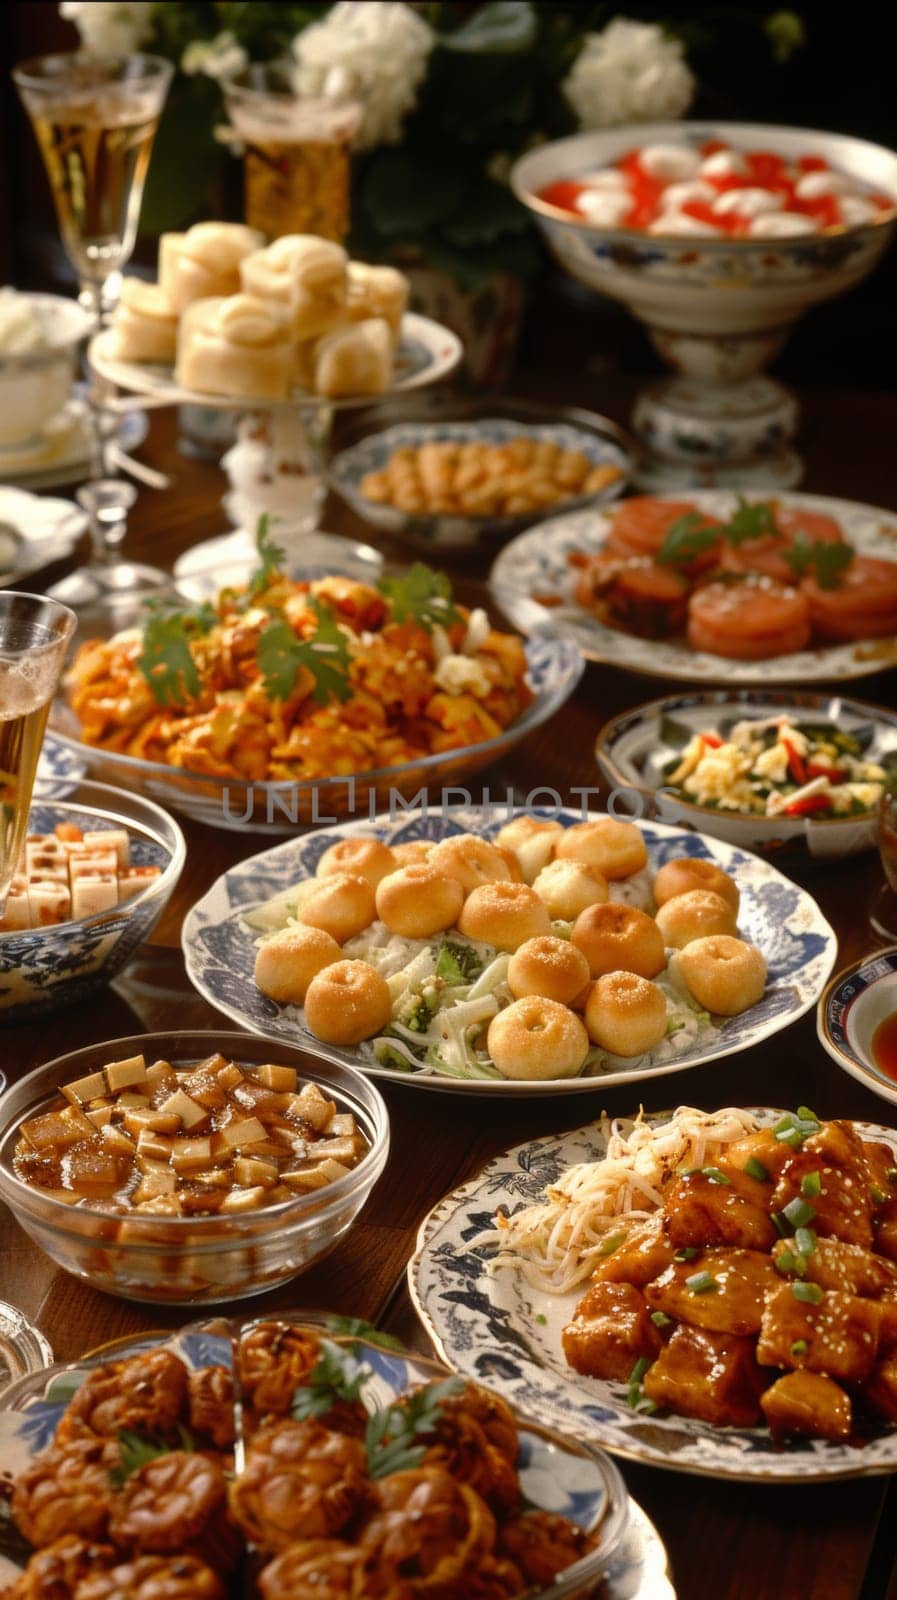 A table filled with plates of food and wine glasses